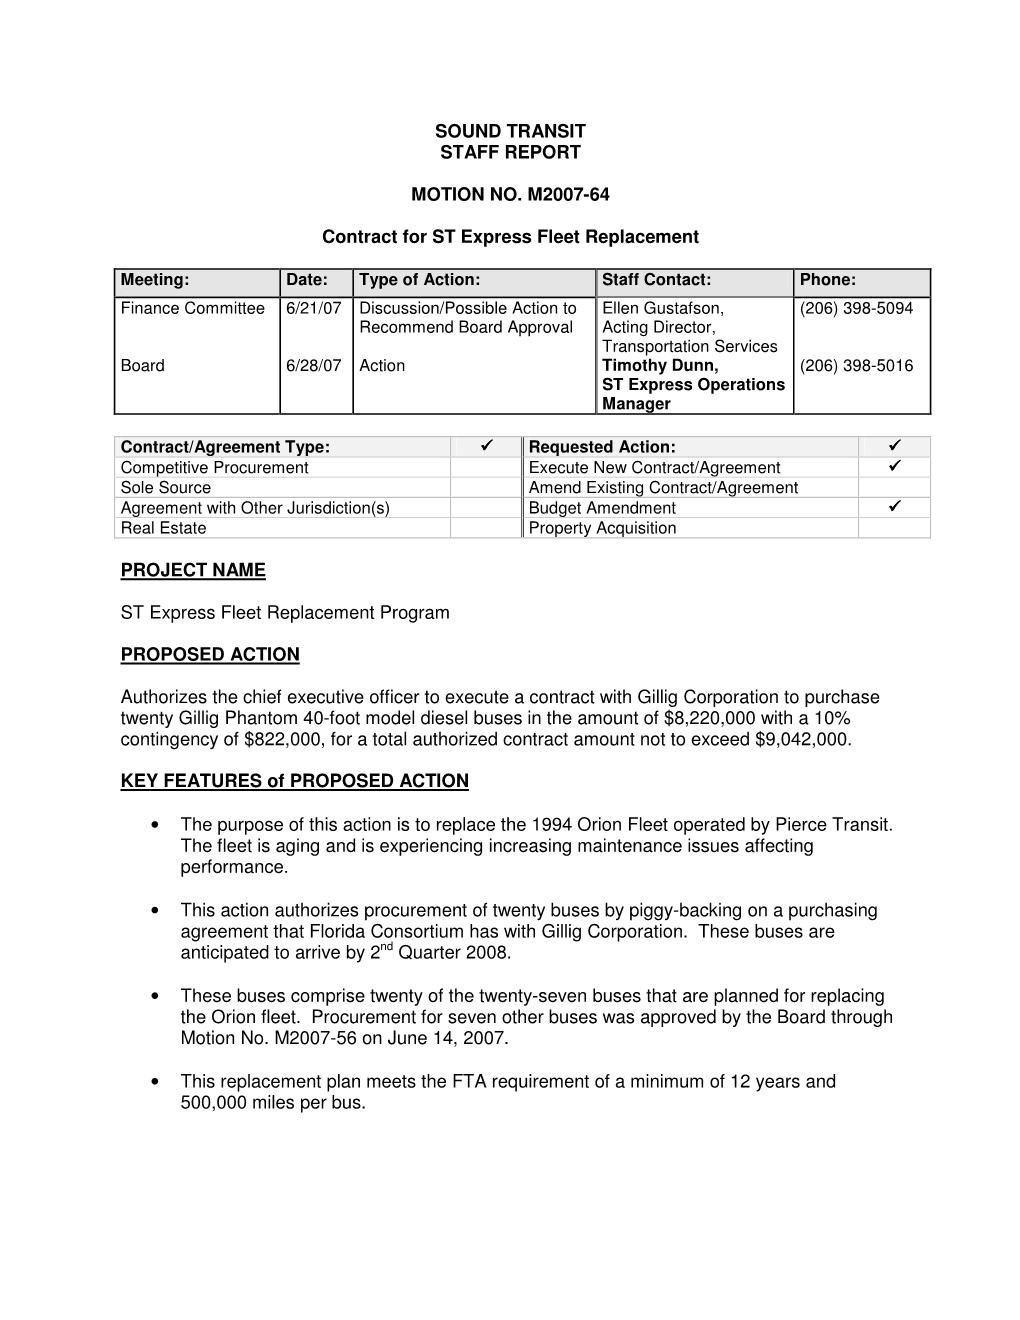 SOUND TRANSIT STAFF REPORT MOTION NO. M2007-64 Contract